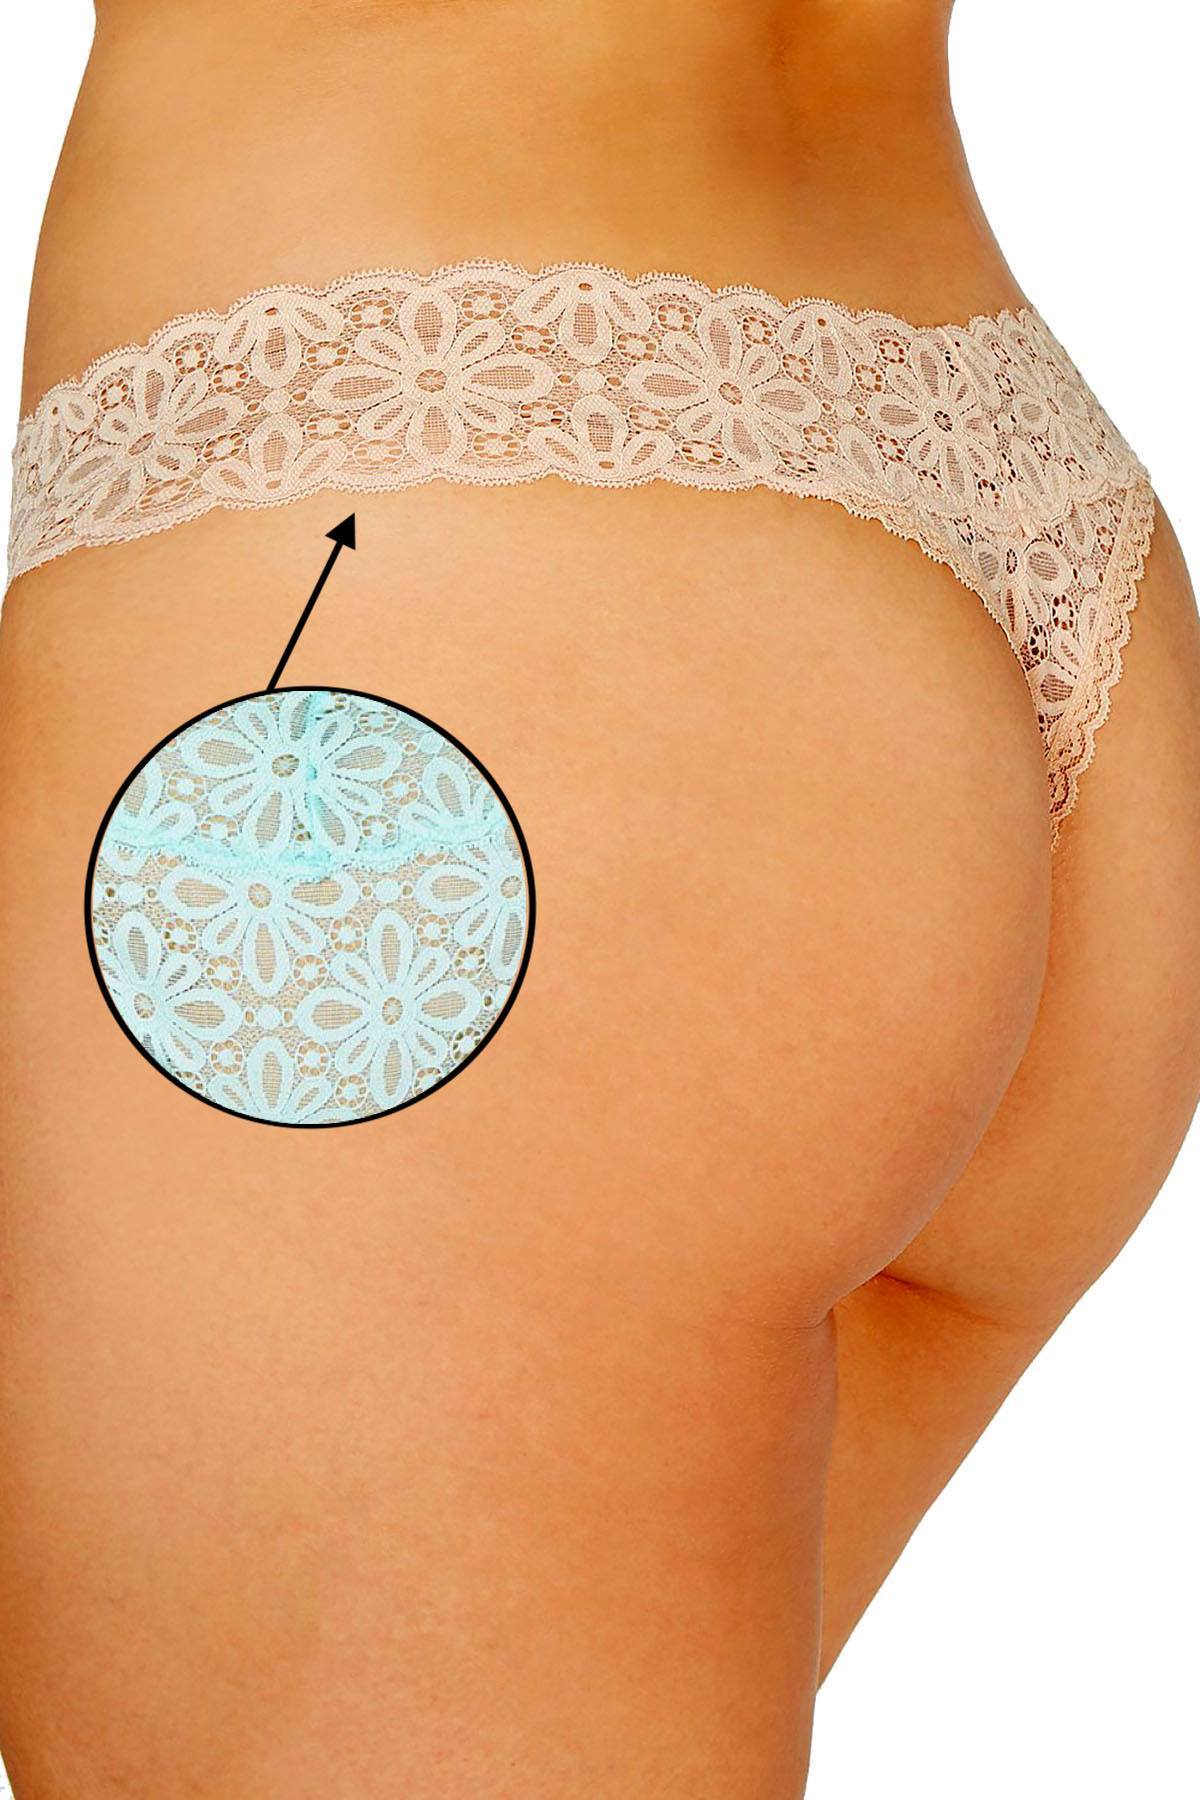 Jenni PLUS Lace Thong in Excite Mint